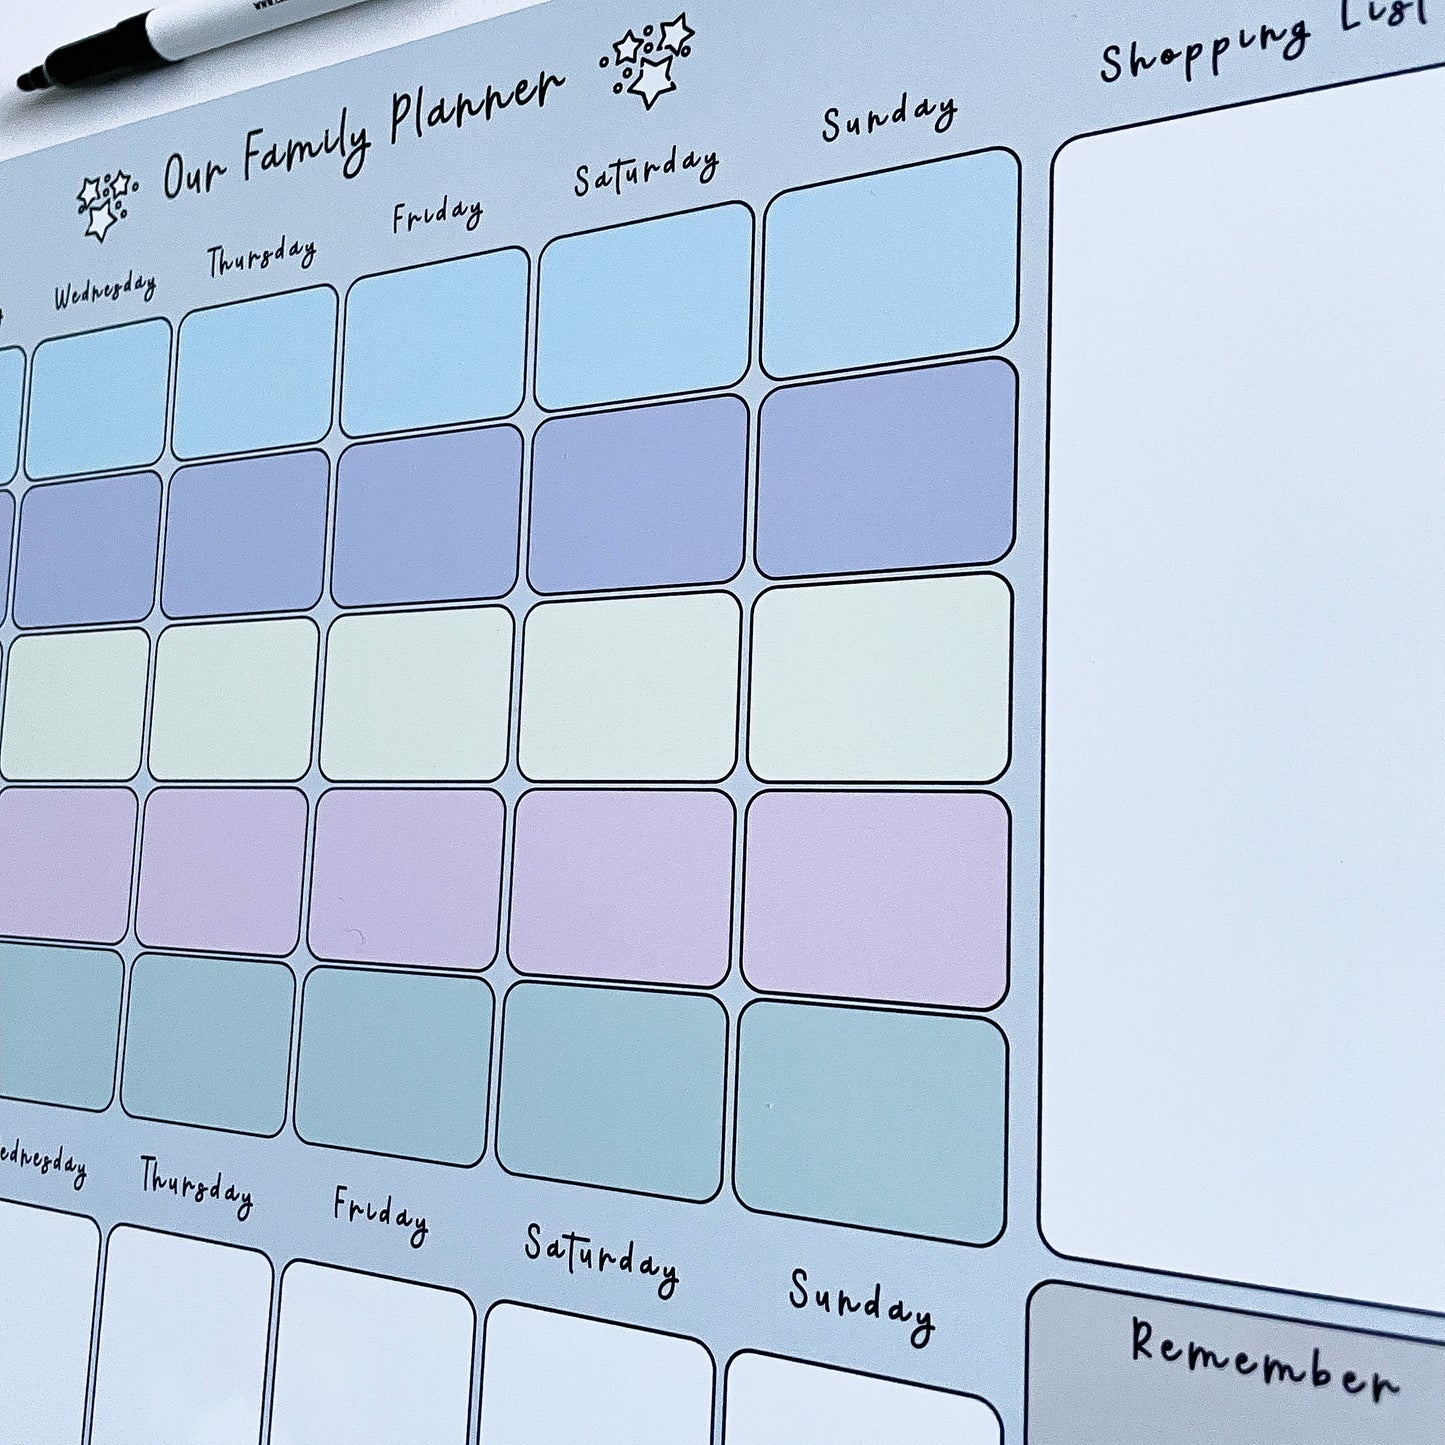 Weekly Family Planner with Meals Whiteboard